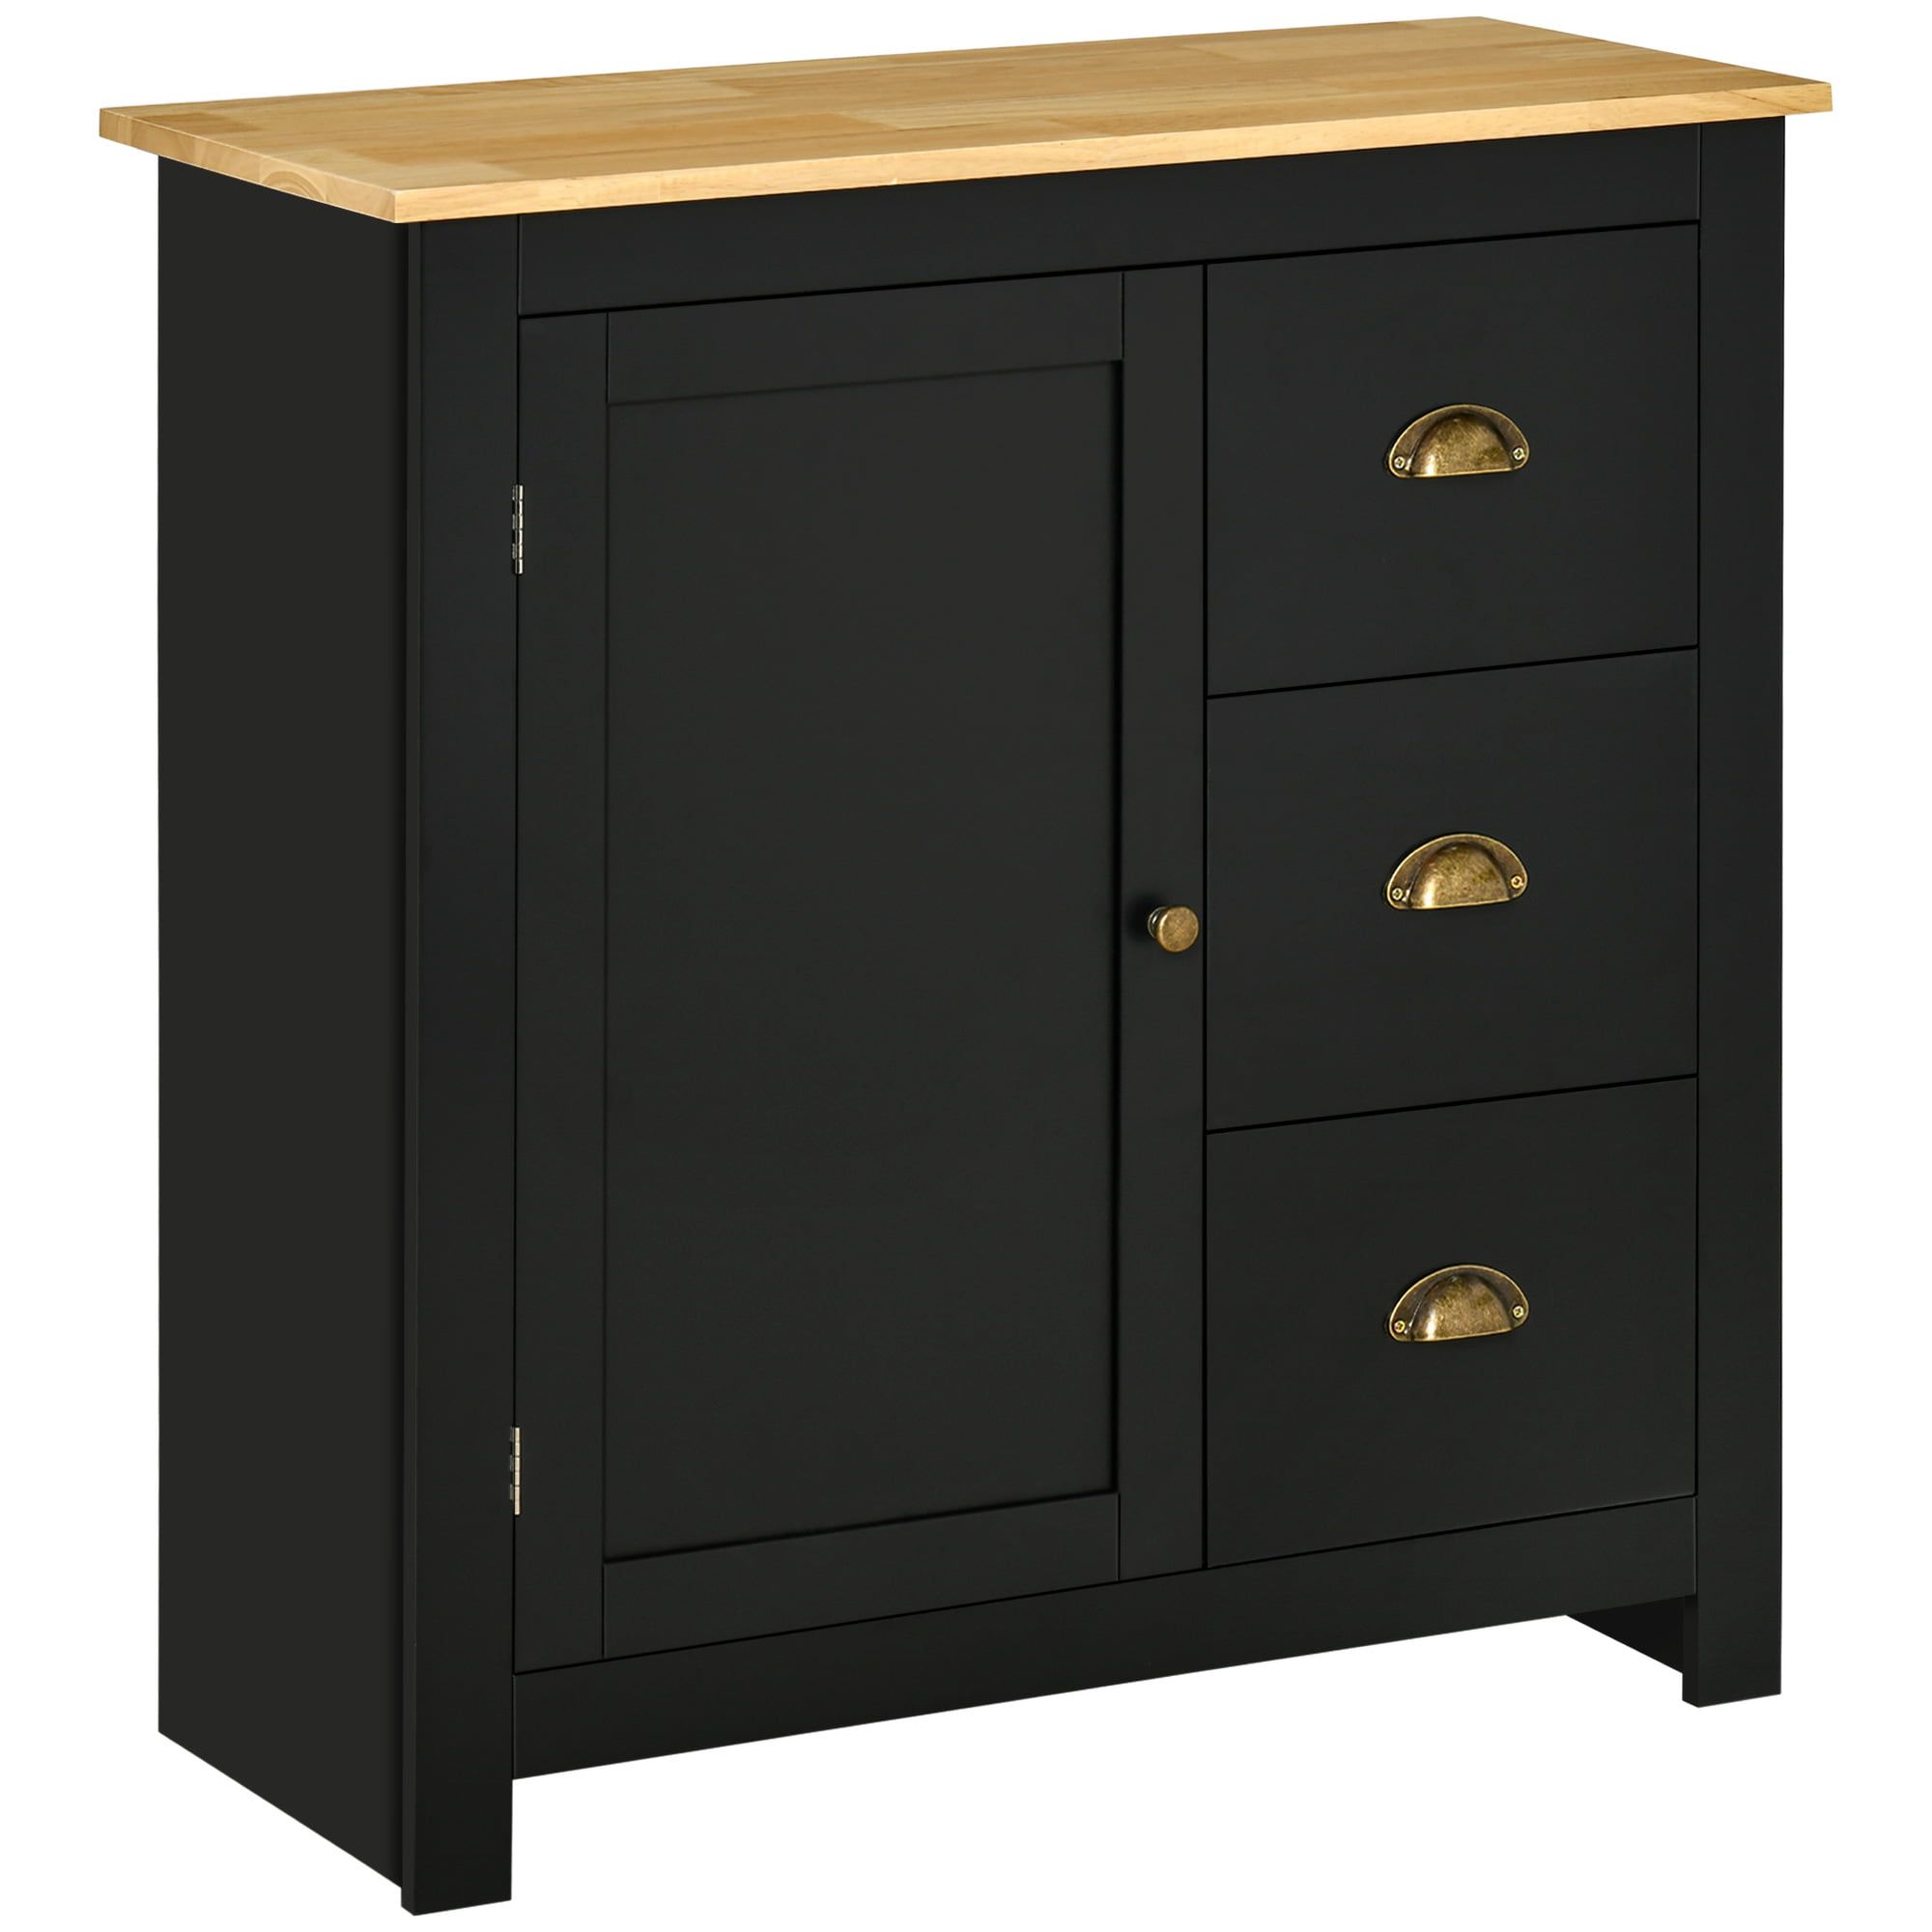 Homcom Modern Kitchen Cabinet, Storage Sideboard, Buffet Table With Rubberwood  Top, 3 Drawers And Cabinet With Adjustable Shelf, Black – Walmart Inside Most Recent Sideboards With Rubberwood Top (View 5 of 15)